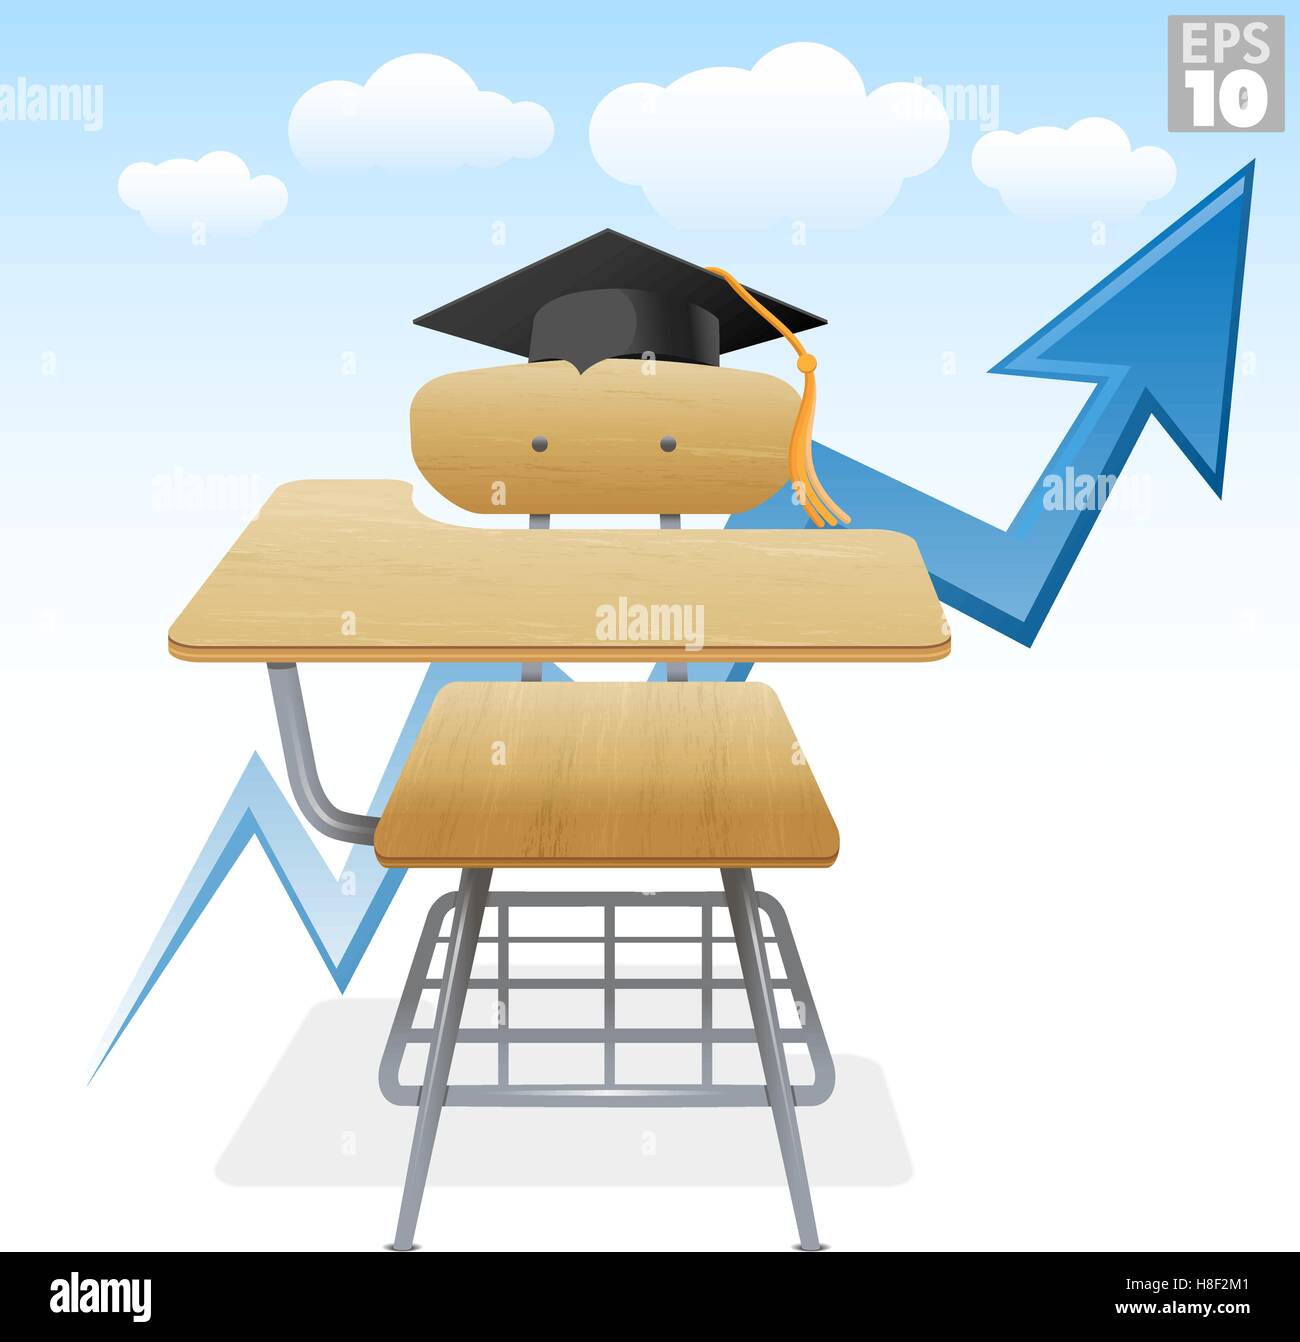 Higher learning with school desk, graduation hat, and sky Stock Vector